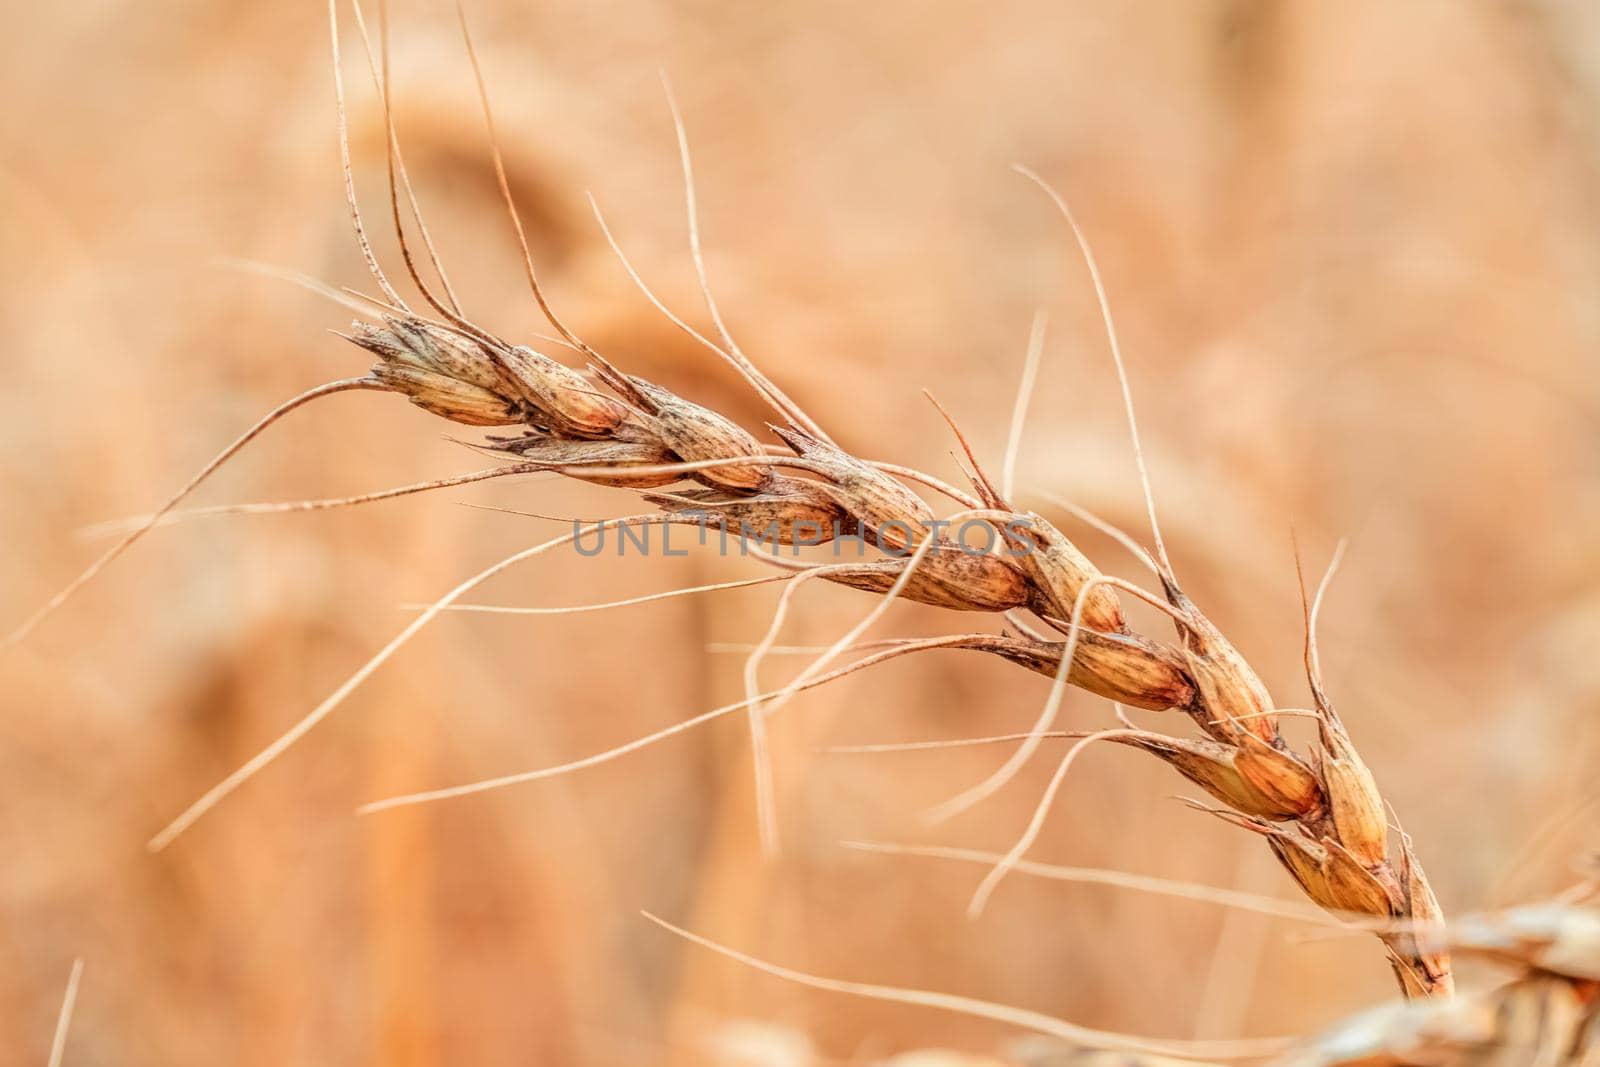 Golden Cereal field with ears of wheat,Agriculture farm and farming concept.Harvest.Wheat field.Rural Scenery.Ripening ears.Rancho harvest Concept.Ripe ears of wheat.Cereal crop.Bread, rye and grain by YevgeniySam